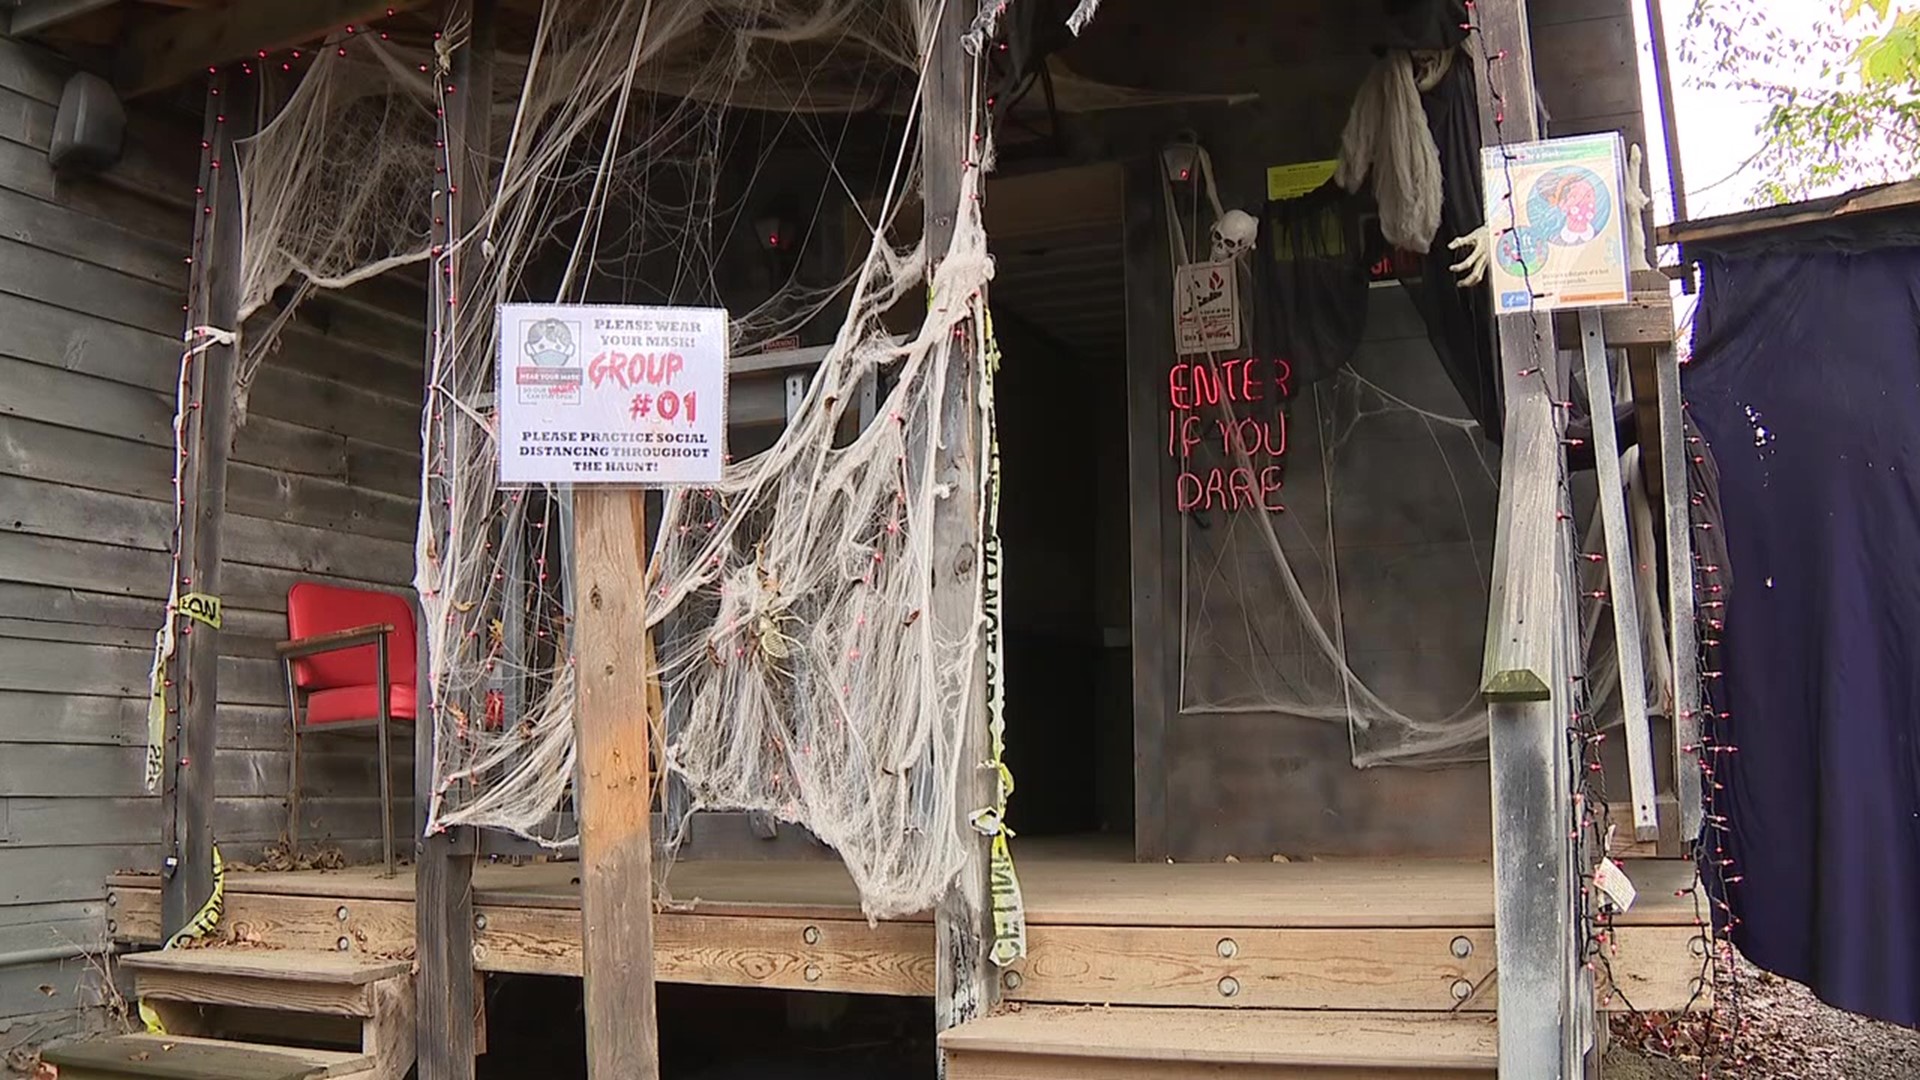 Elysburg Haunted House adds COVID19 safety precautions